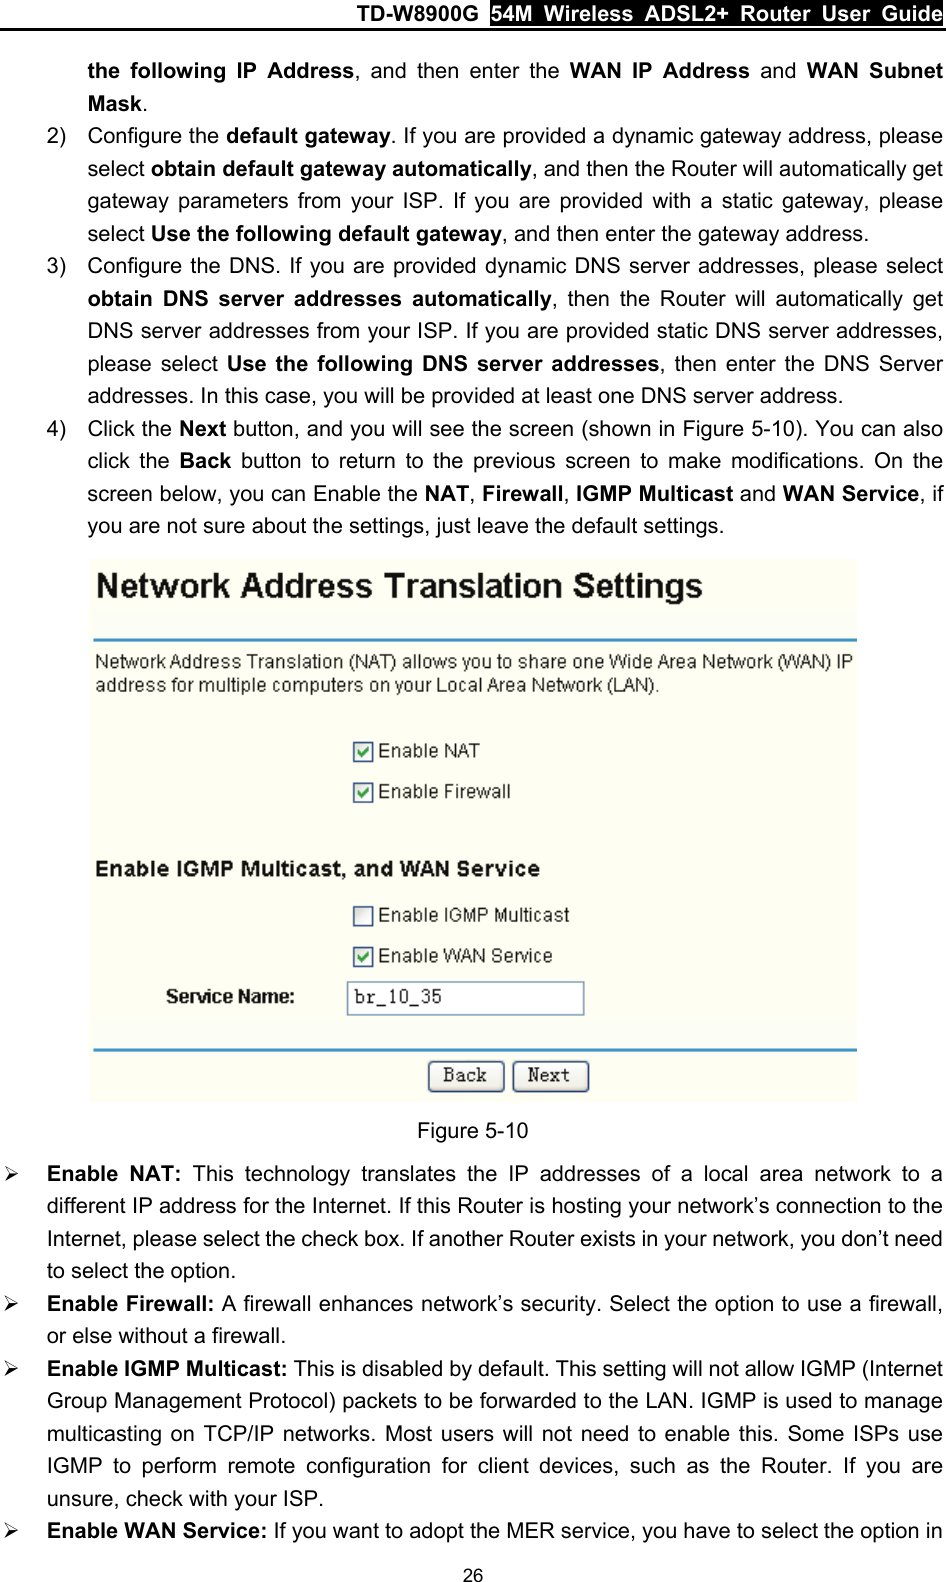 TD-W8900G  54M Wireless ADSL2+ Router User Guide 26 the following IP Address, and then enter the WAN IP Address and WAN Subnet Mask. 2) Configure the default gateway. If you are provided a dynamic gateway address, please select obtain default gateway automatically, and then the Router will automatically get gateway parameters from your ISP. If you are provided with a static gateway, please select Use the following default gateway, and then enter the gateway address. 3)  Configure the DNS. If you are provided dynamic DNS server addresses, please select obtain DNS server addresses automatically, then the Router will automatically get DNS server addresses from your ISP. If you are provided static DNS server addresses, please select Use the following DNS server addresses, then enter the DNS Server addresses. In this case, you will be provided at least one DNS server address. 4) Click the Next button, and you will see the screen (shown in Figure 5-10). You can also click the Back button to return to the previous screen to make modifications. On the screen below, you can Enable the NAT, Firewall, IGMP Multicast and WAN Service, if you are not sure about the settings, just leave the default settings.  Figure 5-10 ¾ Enable NAT: This technology translates the IP addresses of a local area network to a different IP address for the Internet. If this Router is hosting your network’s connection to the Internet, please select the check box. If another Router exists in your network, you don’t need to select the option. ¾ Enable Firewall: A firewall enhances network’s security. Select the option to use a firewall, or else without a firewall. ¾ Enable IGMP Multicast: This is disabled by default. This setting will not allow IGMP (Internet Group Management Protocol) packets to be forwarded to the LAN. IGMP is used to manage multicasting on TCP/IP networks. Most users will not need to enable this. Some ISPs use IGMP to perform remote configuration for client devices, such as the Router. If you are unsure, check with your ISP. ¾ Enable WAN Service: If you want to adopt the MER service, you have to select the option in 